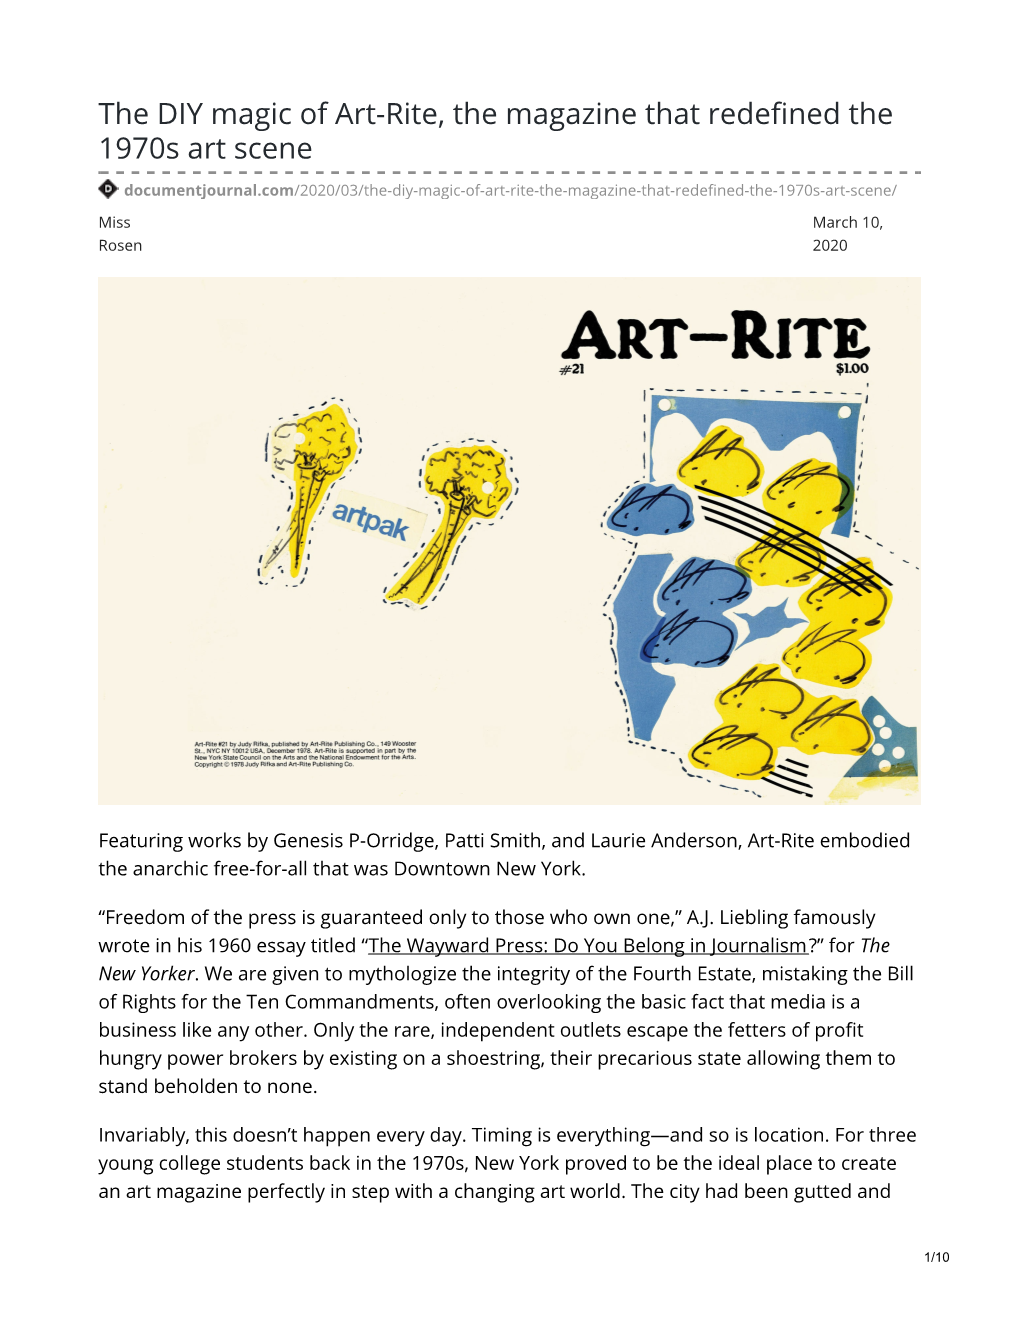 The DIY Magic of Art-Rite, the Magazine That Redefined the 1970S Art Scene